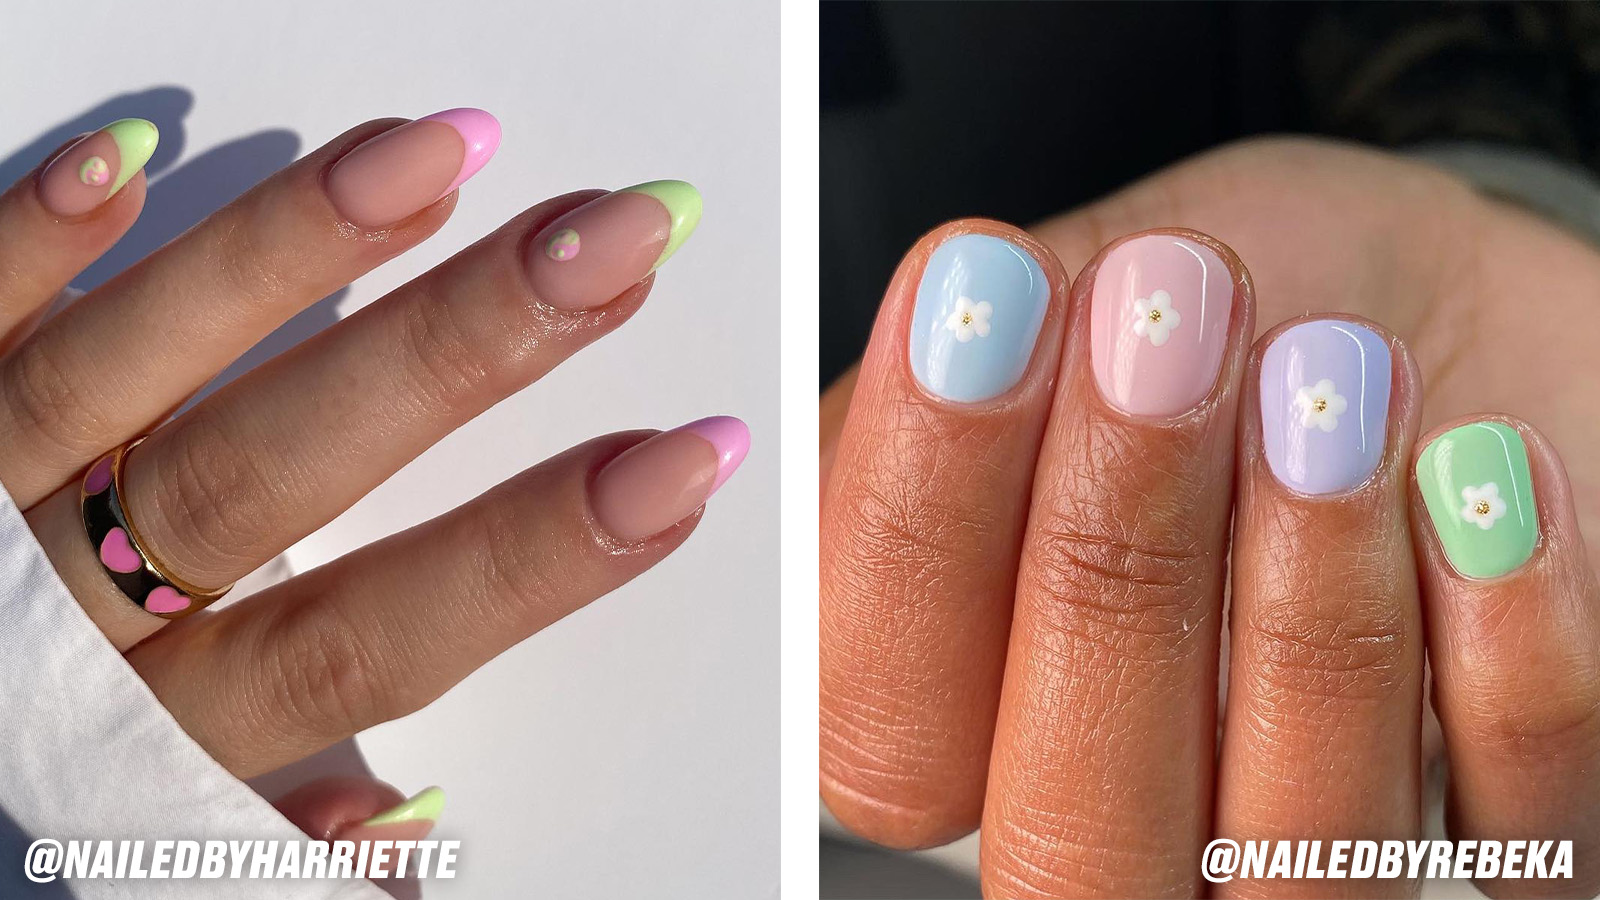 3. "Pastel Nail Polish Designs for a Soft and Summery Look" - wide 5